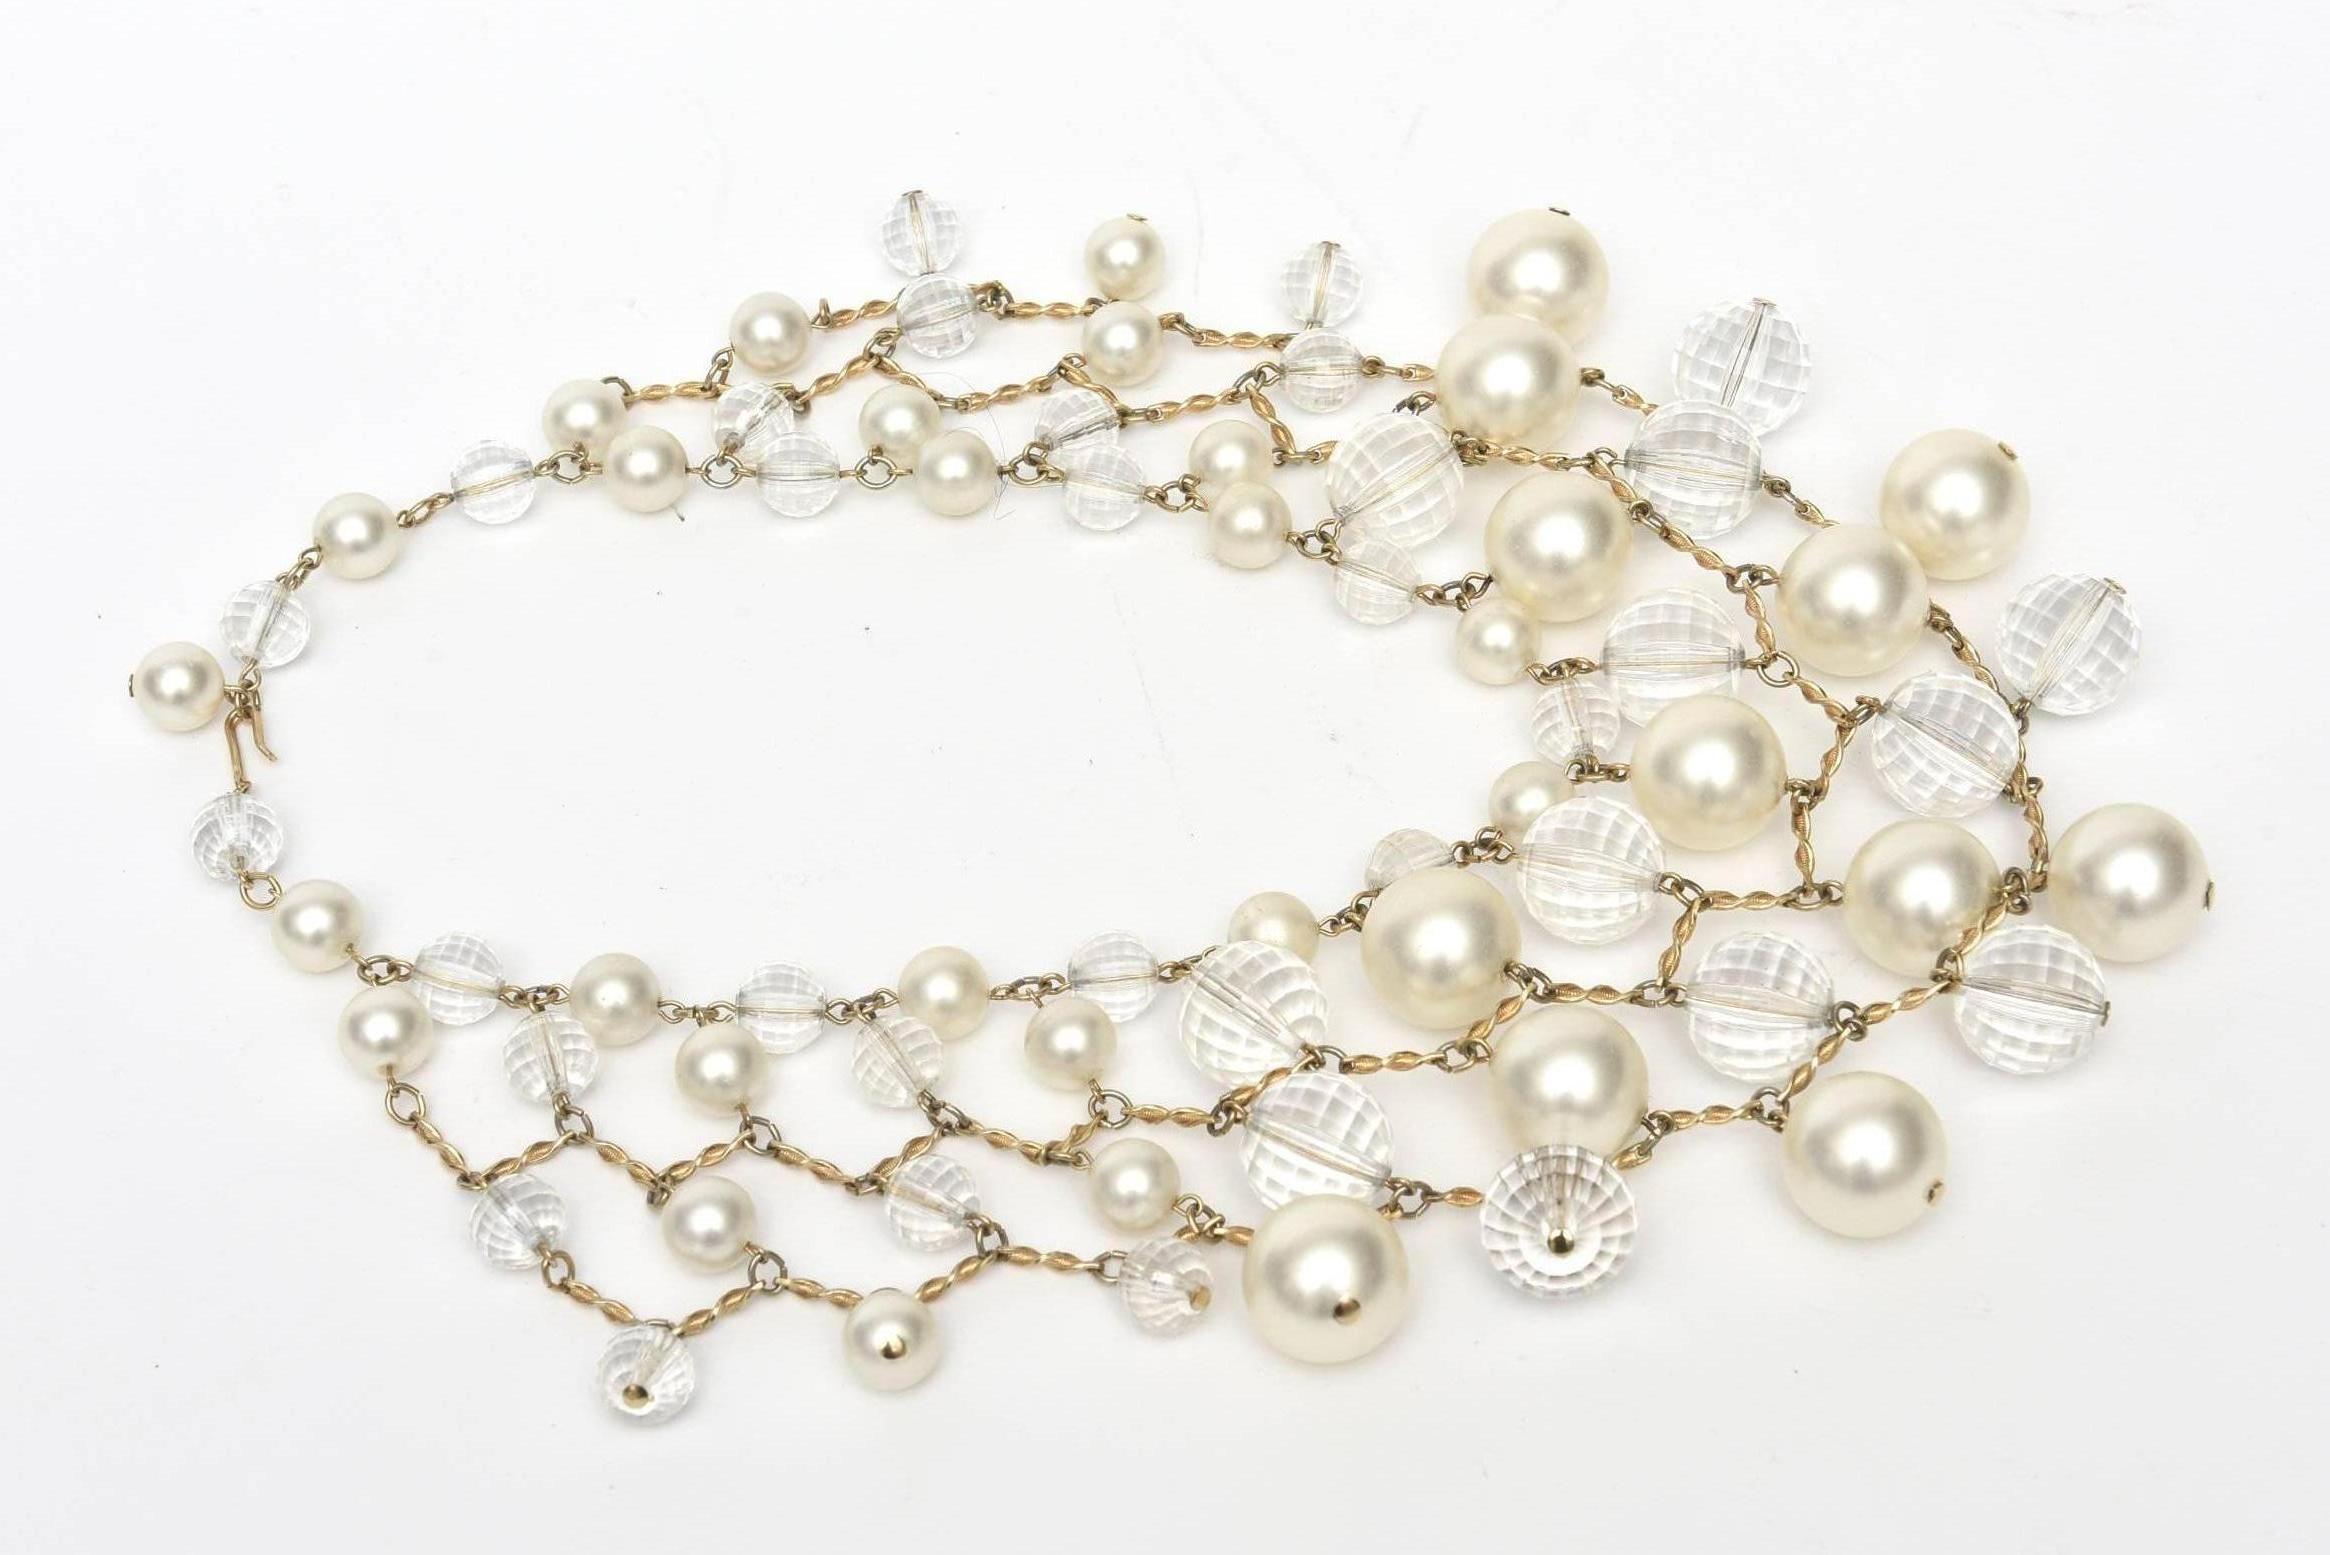 This dramatic and elegant vintage faux pearl,  faceted lucite and brass multi strand bib necklace is a forever statement piece. It lays beautifully on the neck and can go any season from day to evening! This will dress up your cocktail dress, shirt